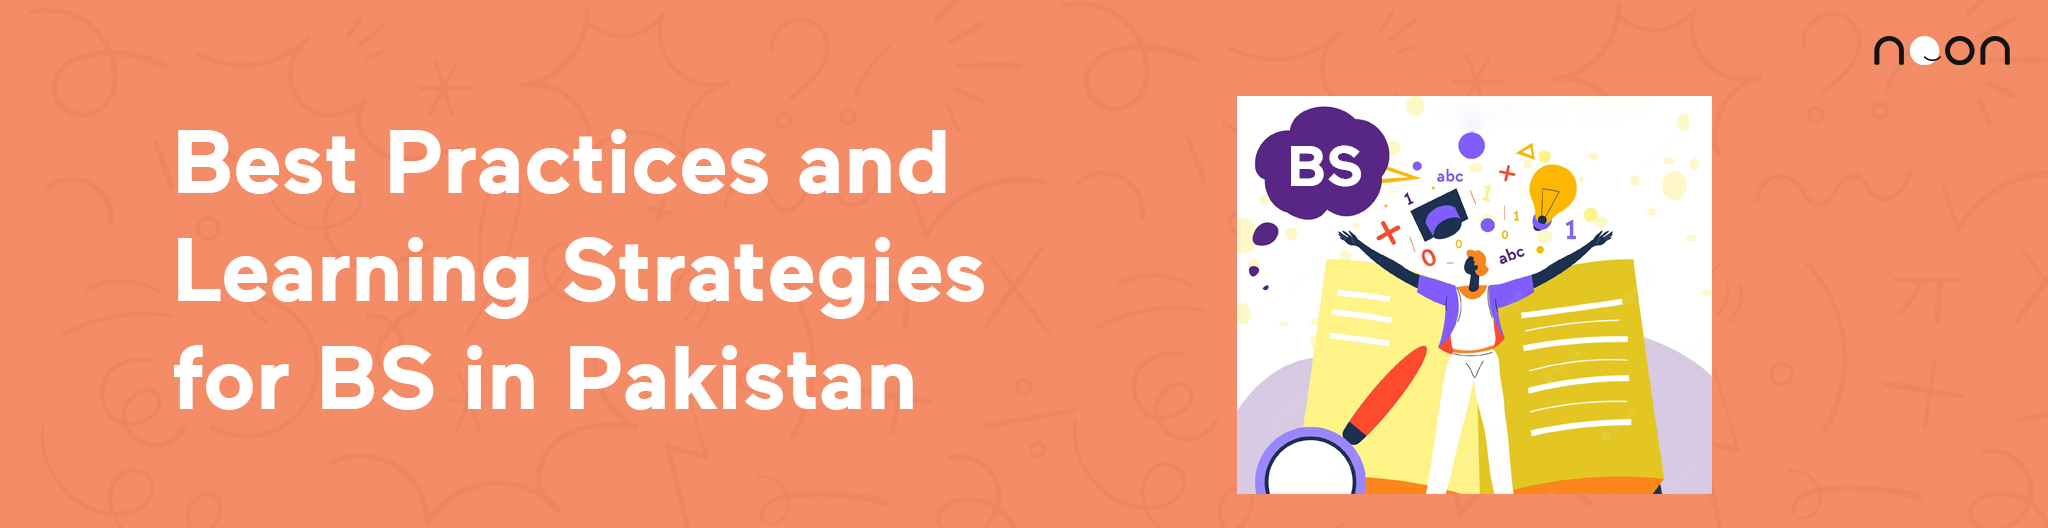 Best Practices and Learning Strategies for BS in Pakistan